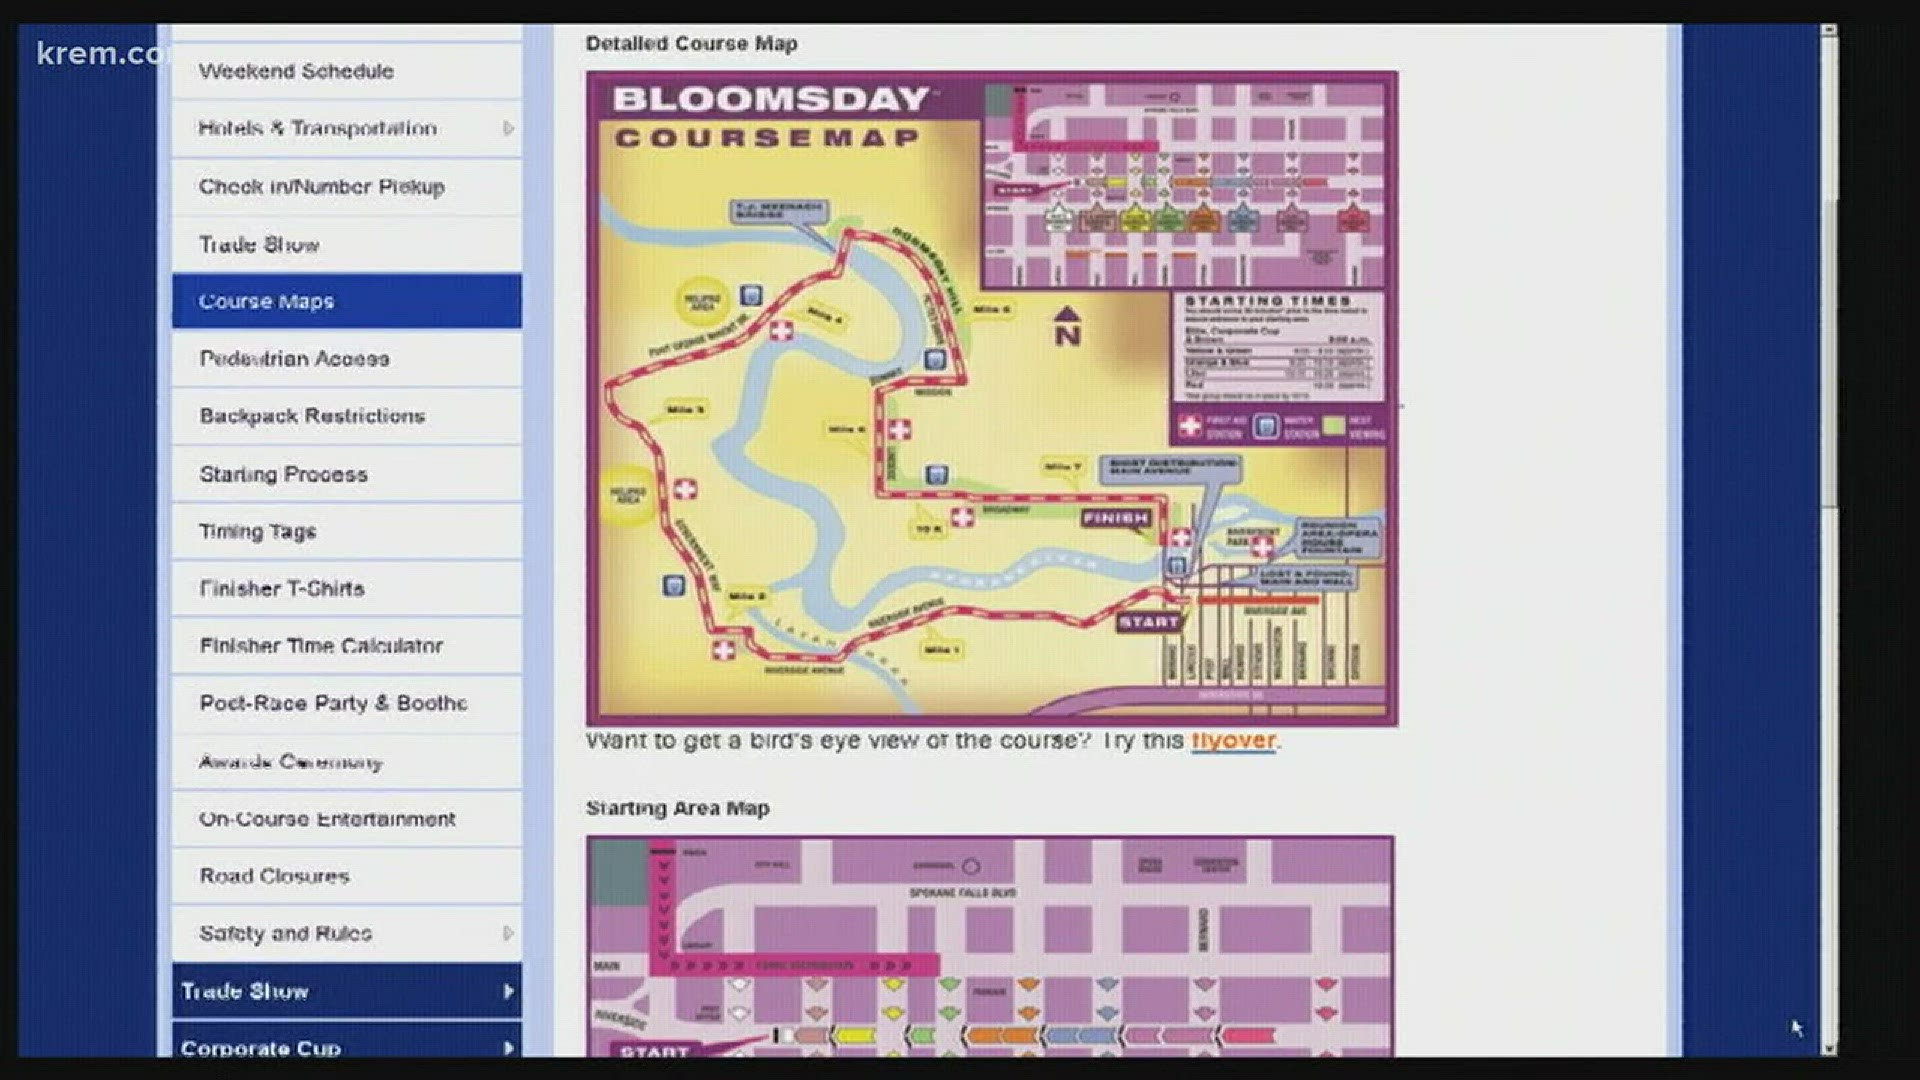 5,000 more people expected at 2018 Bloomsday  (3-20-18)